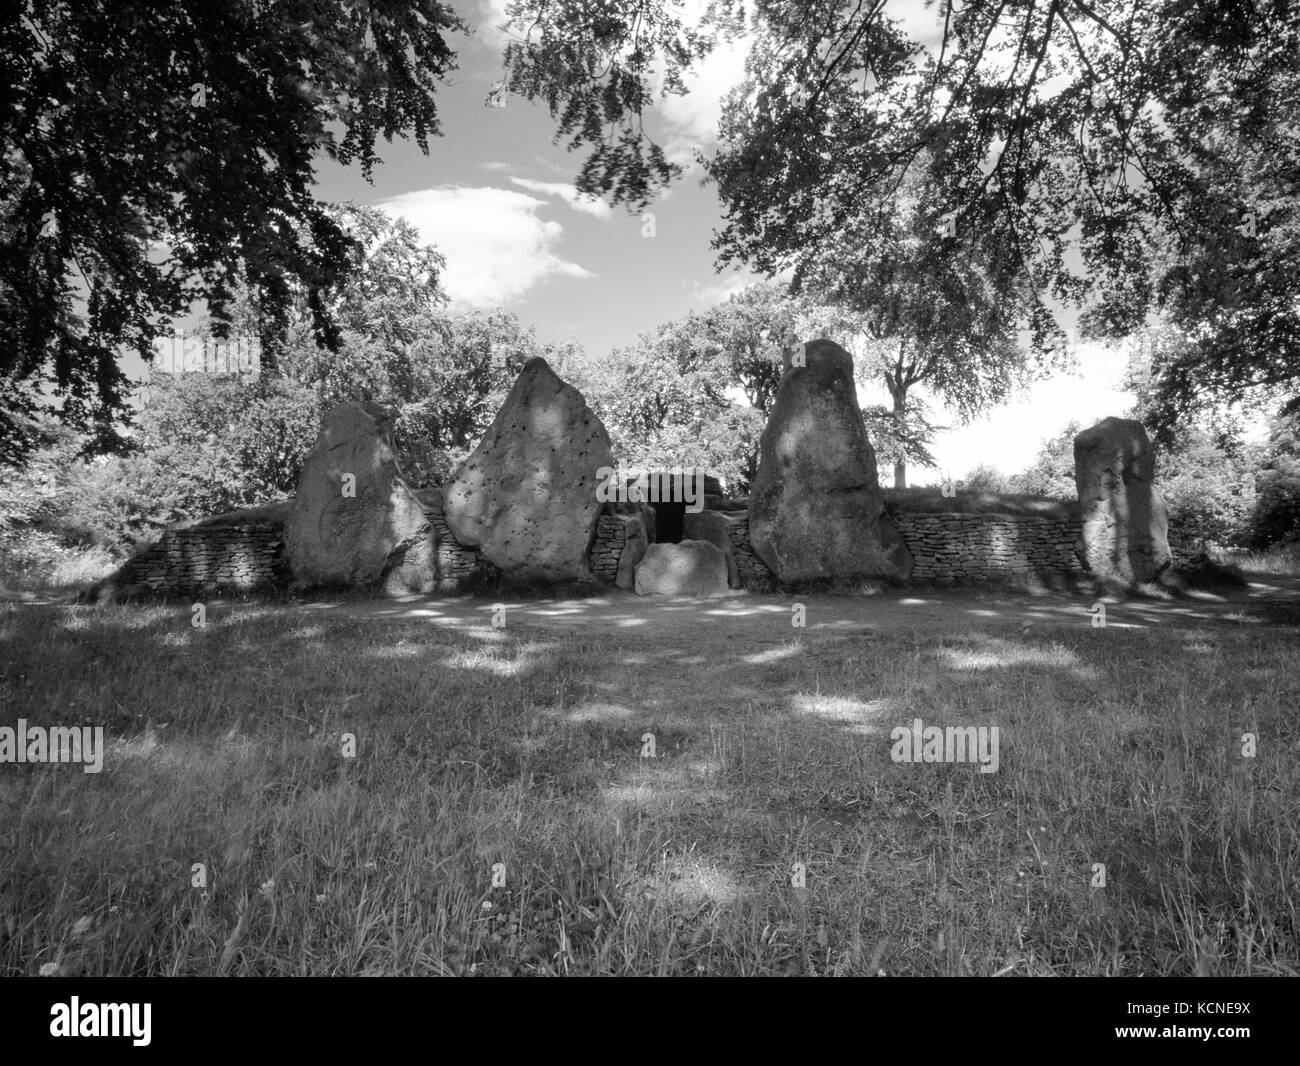 View NNW of megalithic facade, entrance passage & burial chambers of Wayland's Smithy Neolithic long barrow beside Ridgeway long distance path, UK. Stock Photo